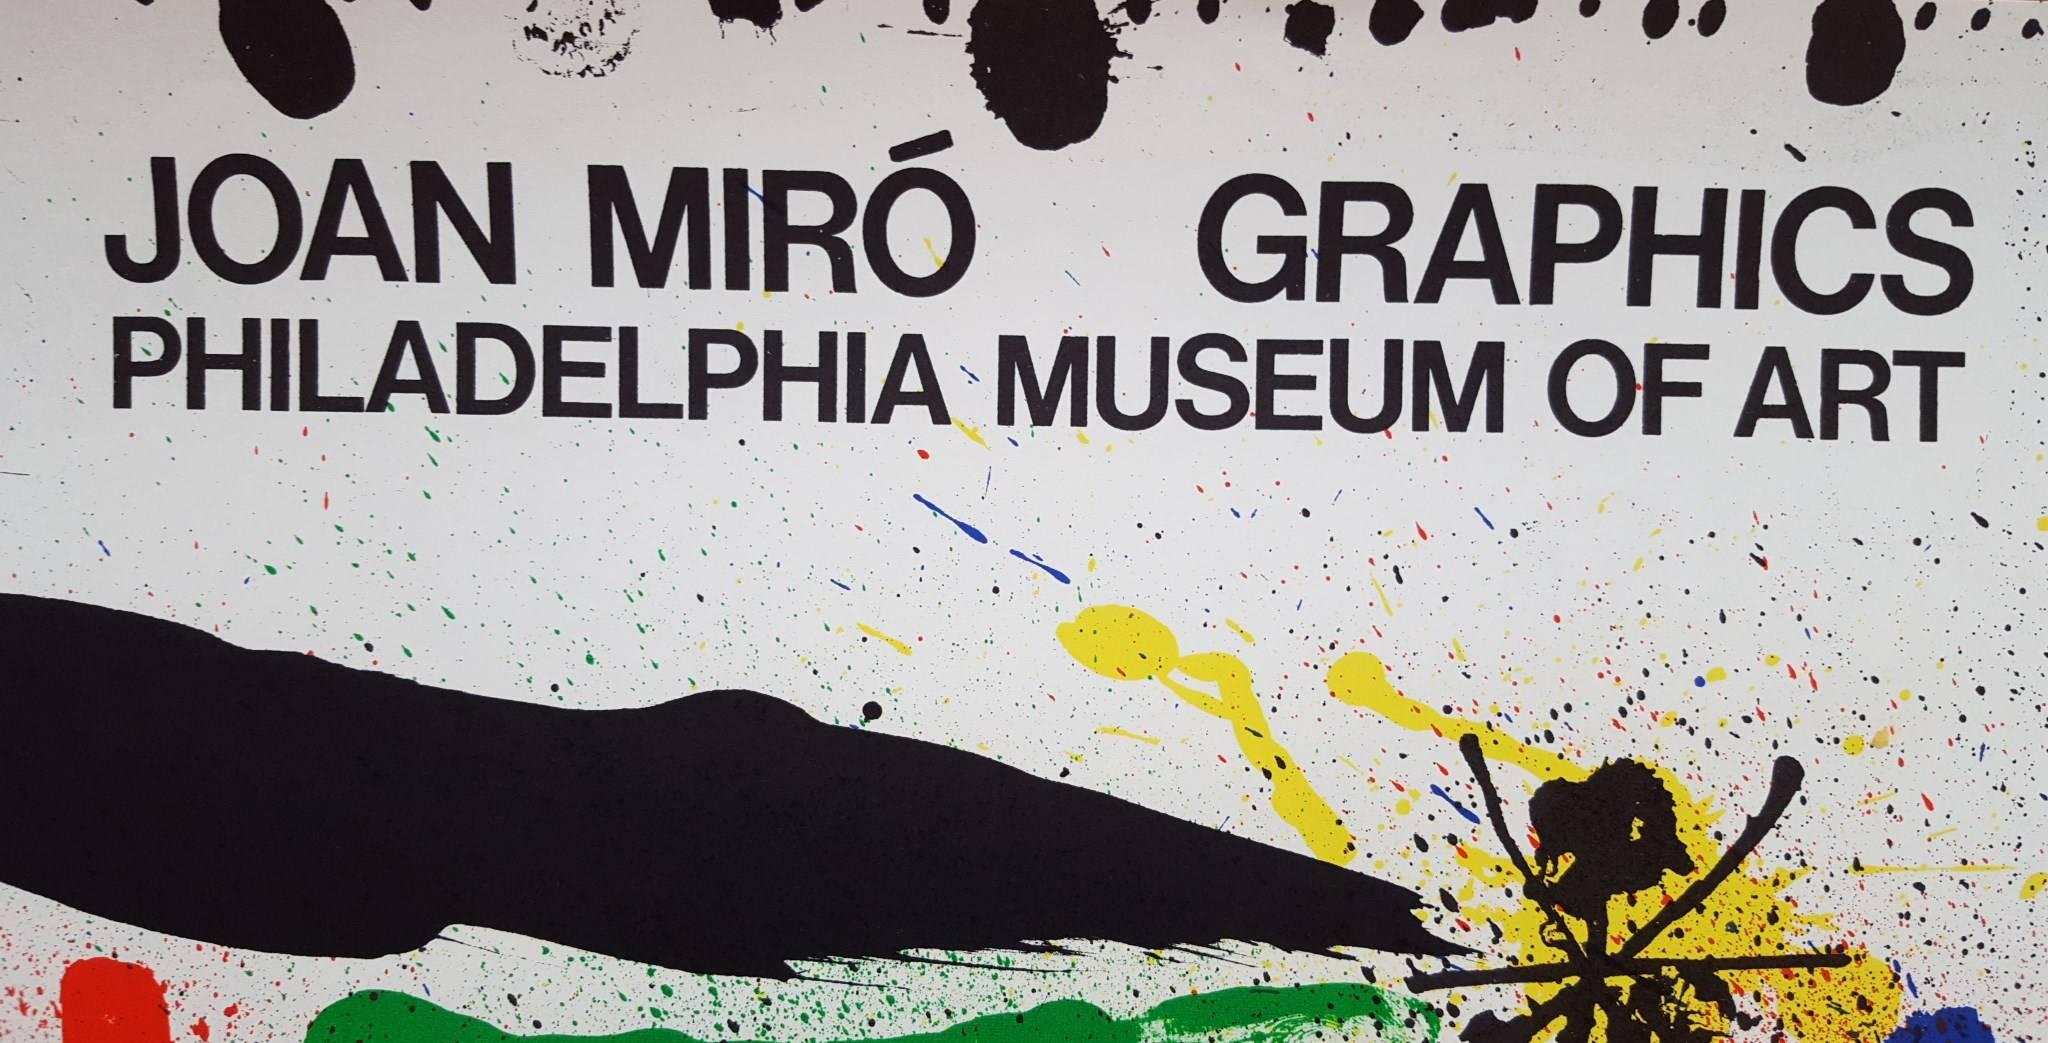 An original lithograph exhibition poster by Spanish artist Joan Miro (1893-1983) titled 